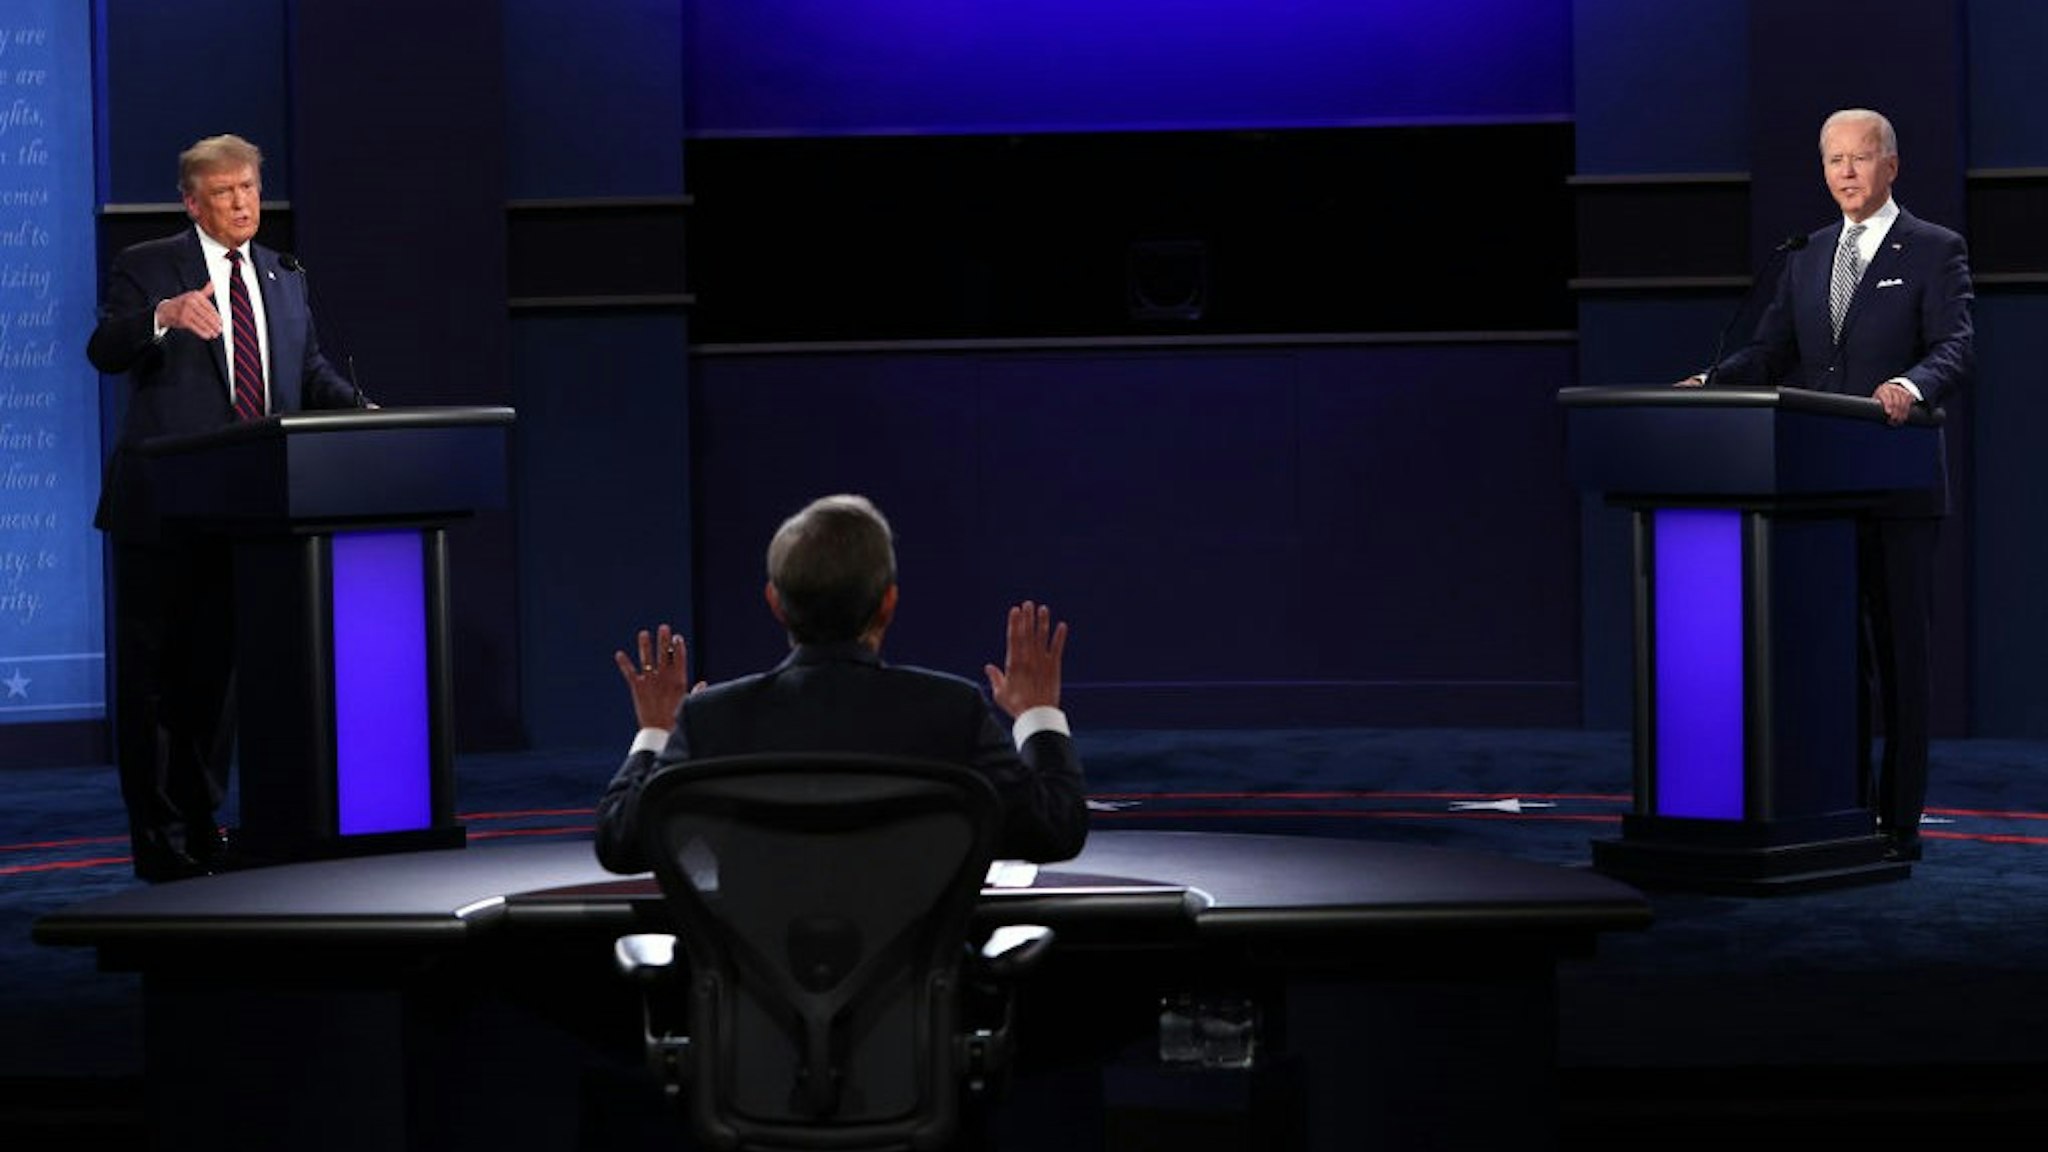 CLEVELAND, OHIO - SEPTEMBER 29: U.S. President Donald Trump and Democratic presidential nominee Joe Biden participate in the first presidential debate moderated by Fox News anchor Chris Wallace (C) at the Health Education Campus of Case Western Reserve University on September 29, 2020 in Cleveland, Ohio. This is the first of three planned debates between the two candidates in the lead up to the election on November 3. (Photo by